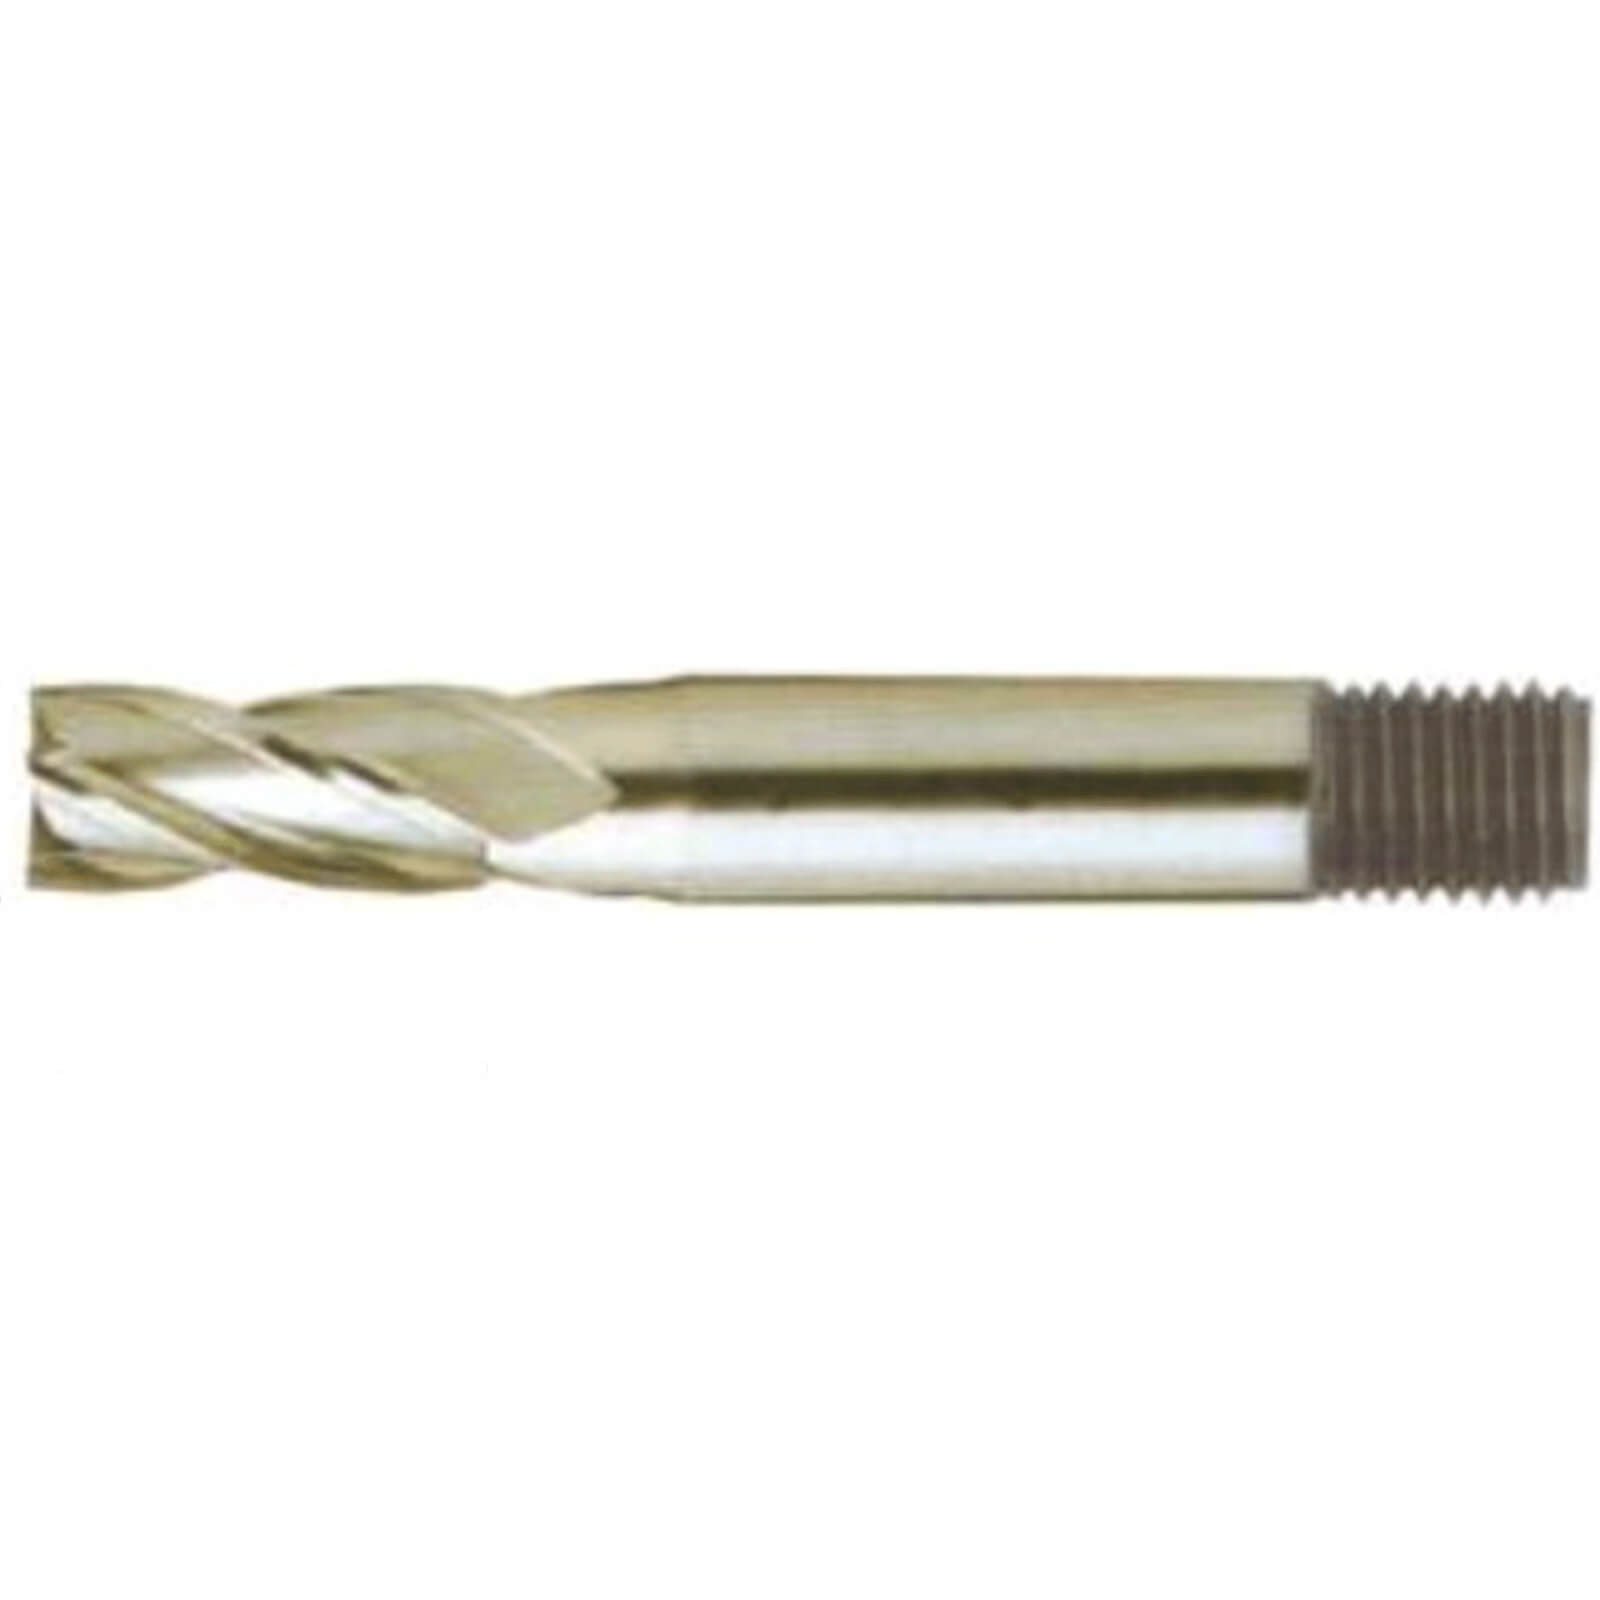 Image of Clarkson M42 Screwed Shank End Mill 17mm